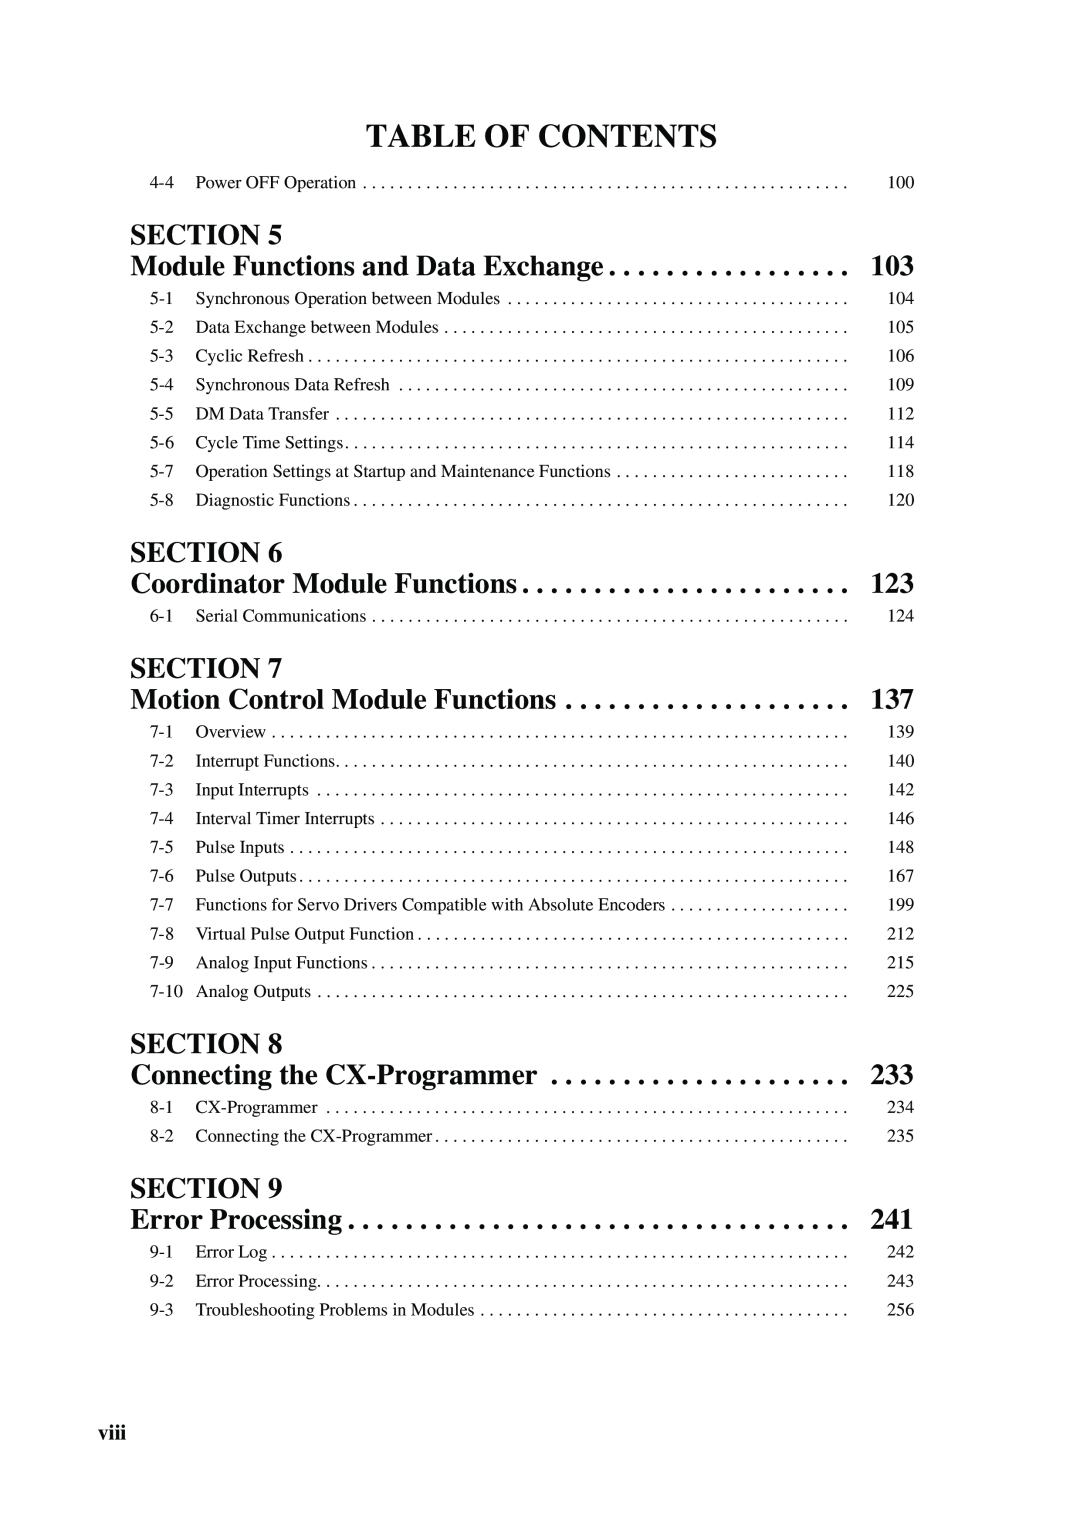 Omron FQM1-MMA21, FQM1-CM001, FQM1-MMP21 operation manual Table Of Contents, Section 